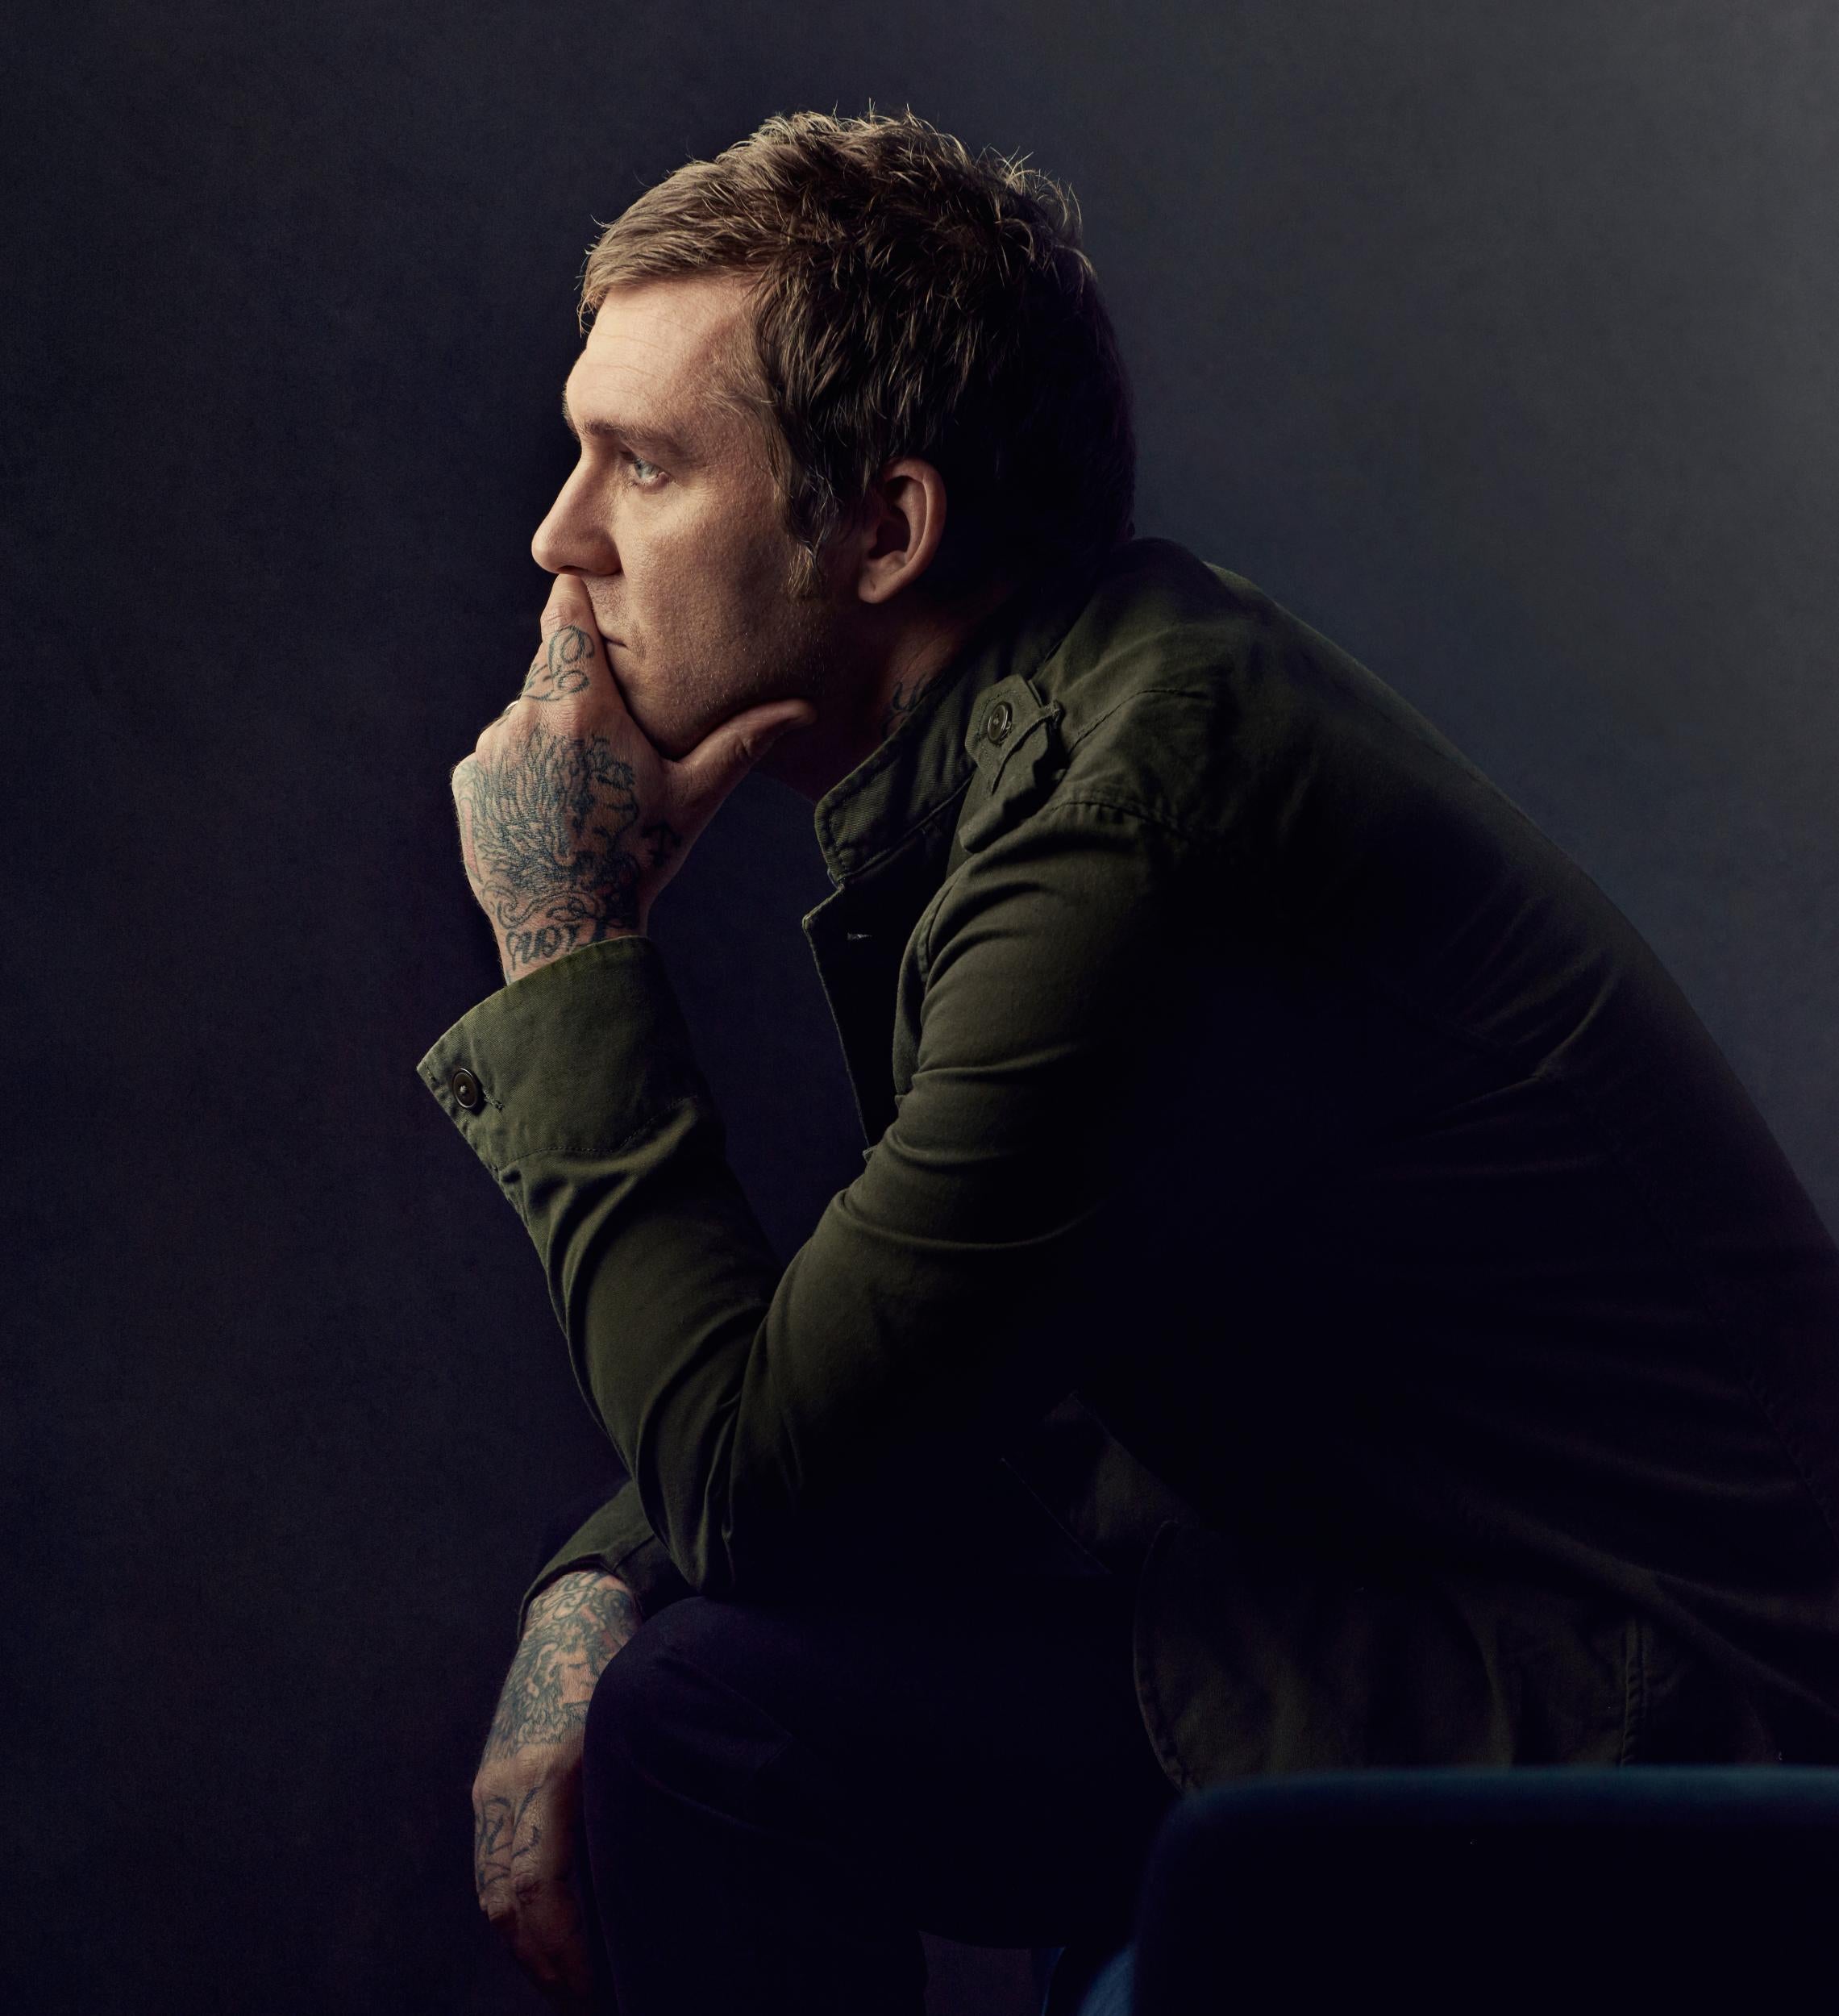 Brian Fallon: 'I didn't know I was going to do a solo record, when The Gaslight Anthem stopped, or completely quit music'